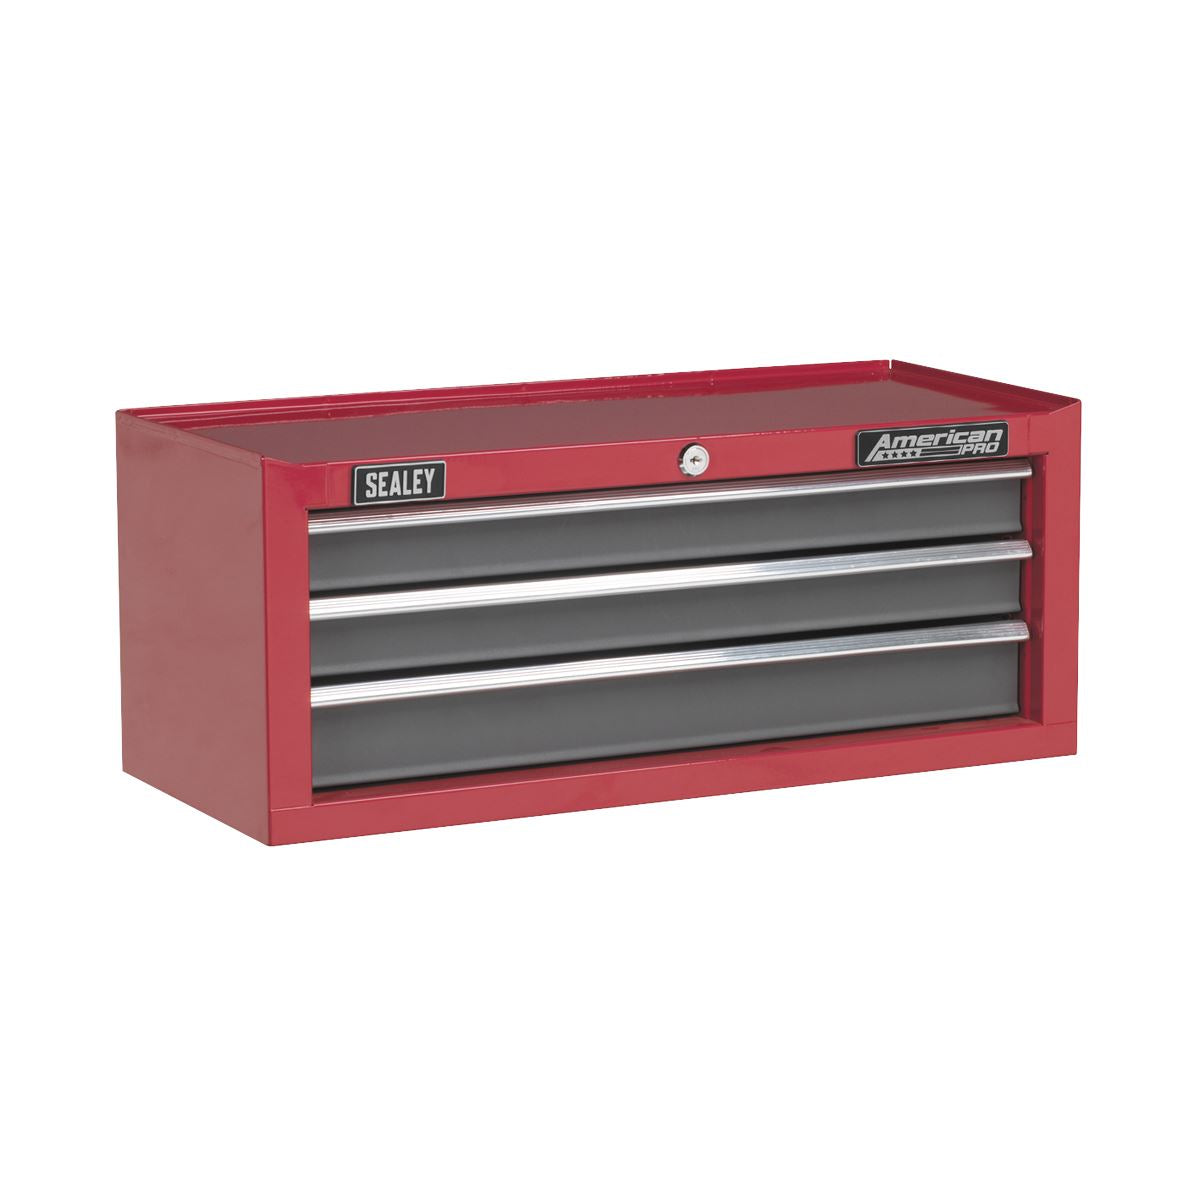 Sealey American Pro Mid-Box Tool Chest 3 Drawer with Ball-Bearing Slides - Red/Grey